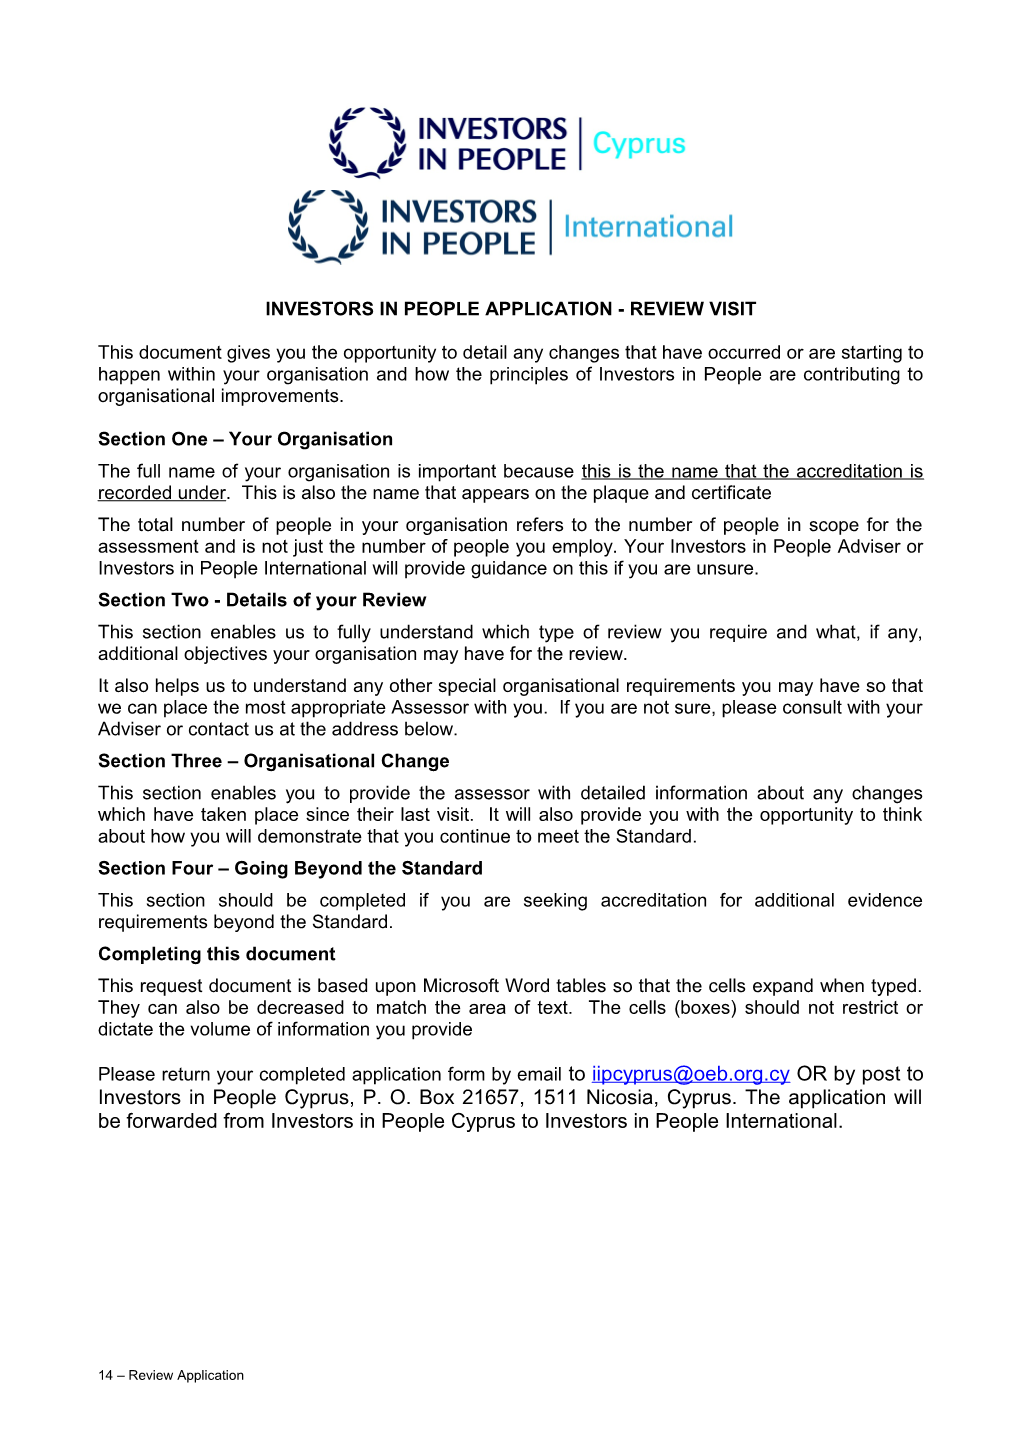 Investors in People Application - Review Visit